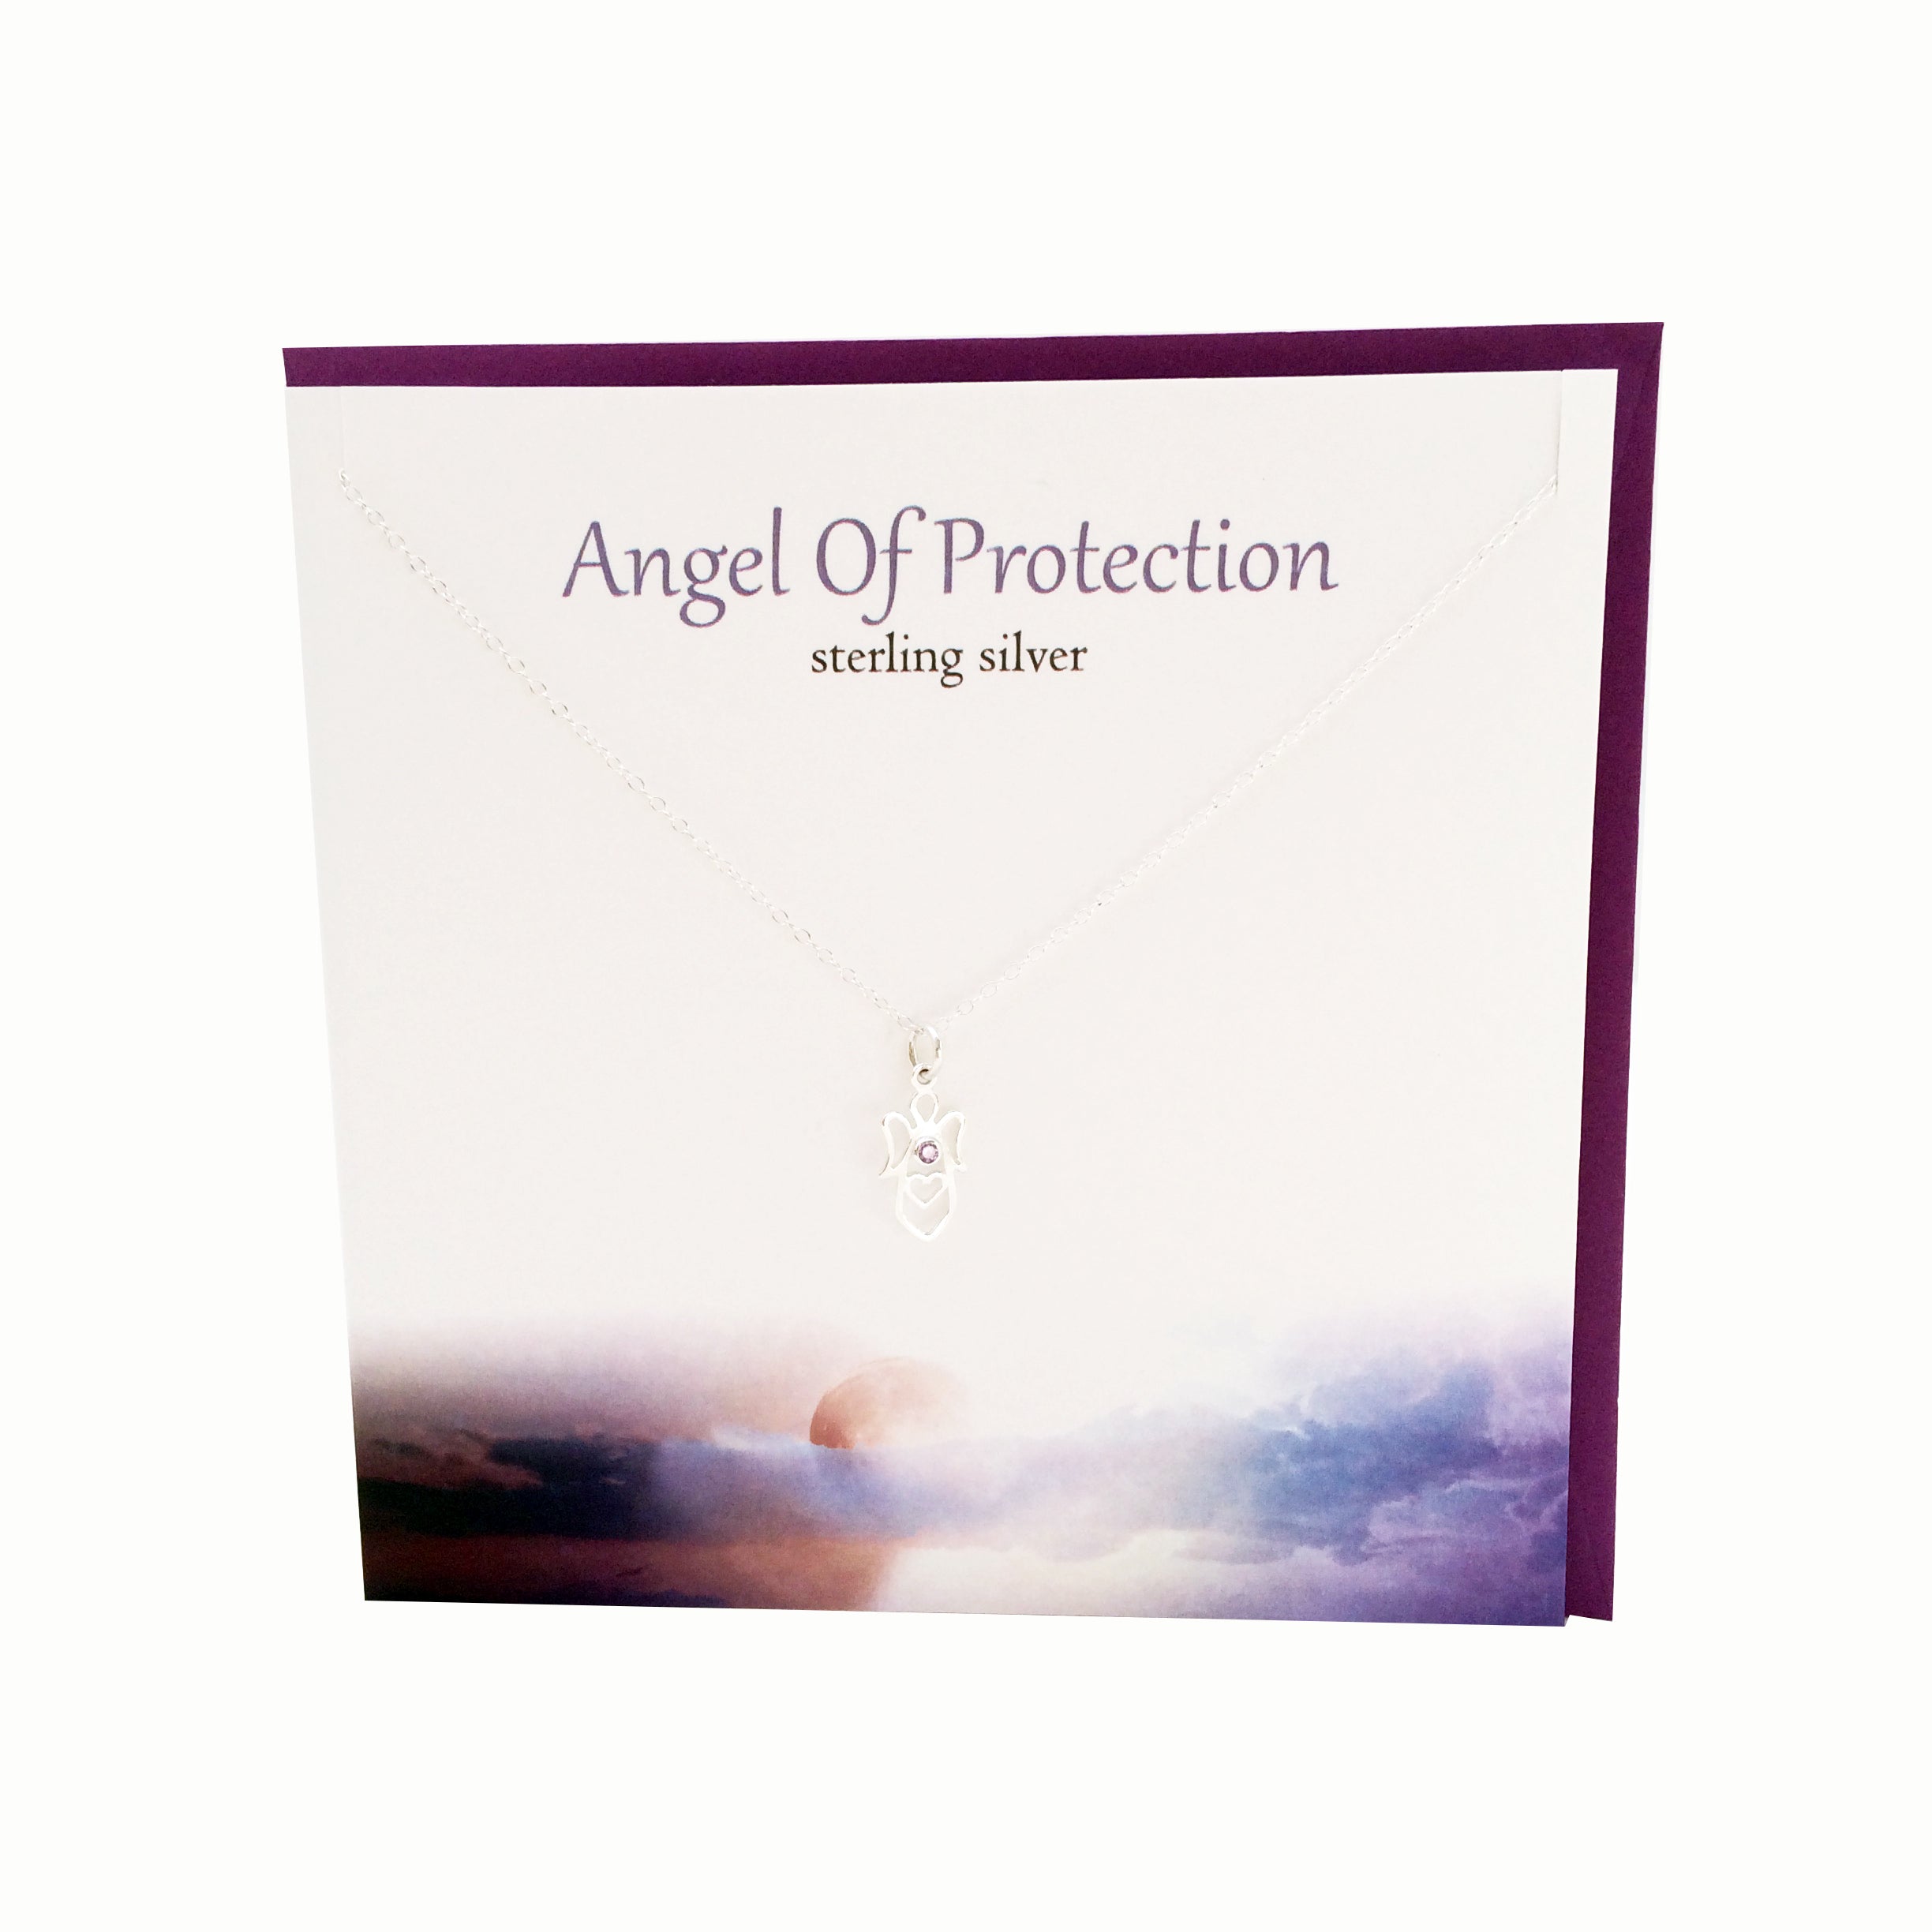 Angel Of Protection silver necklace | The Silver Studio Scotland